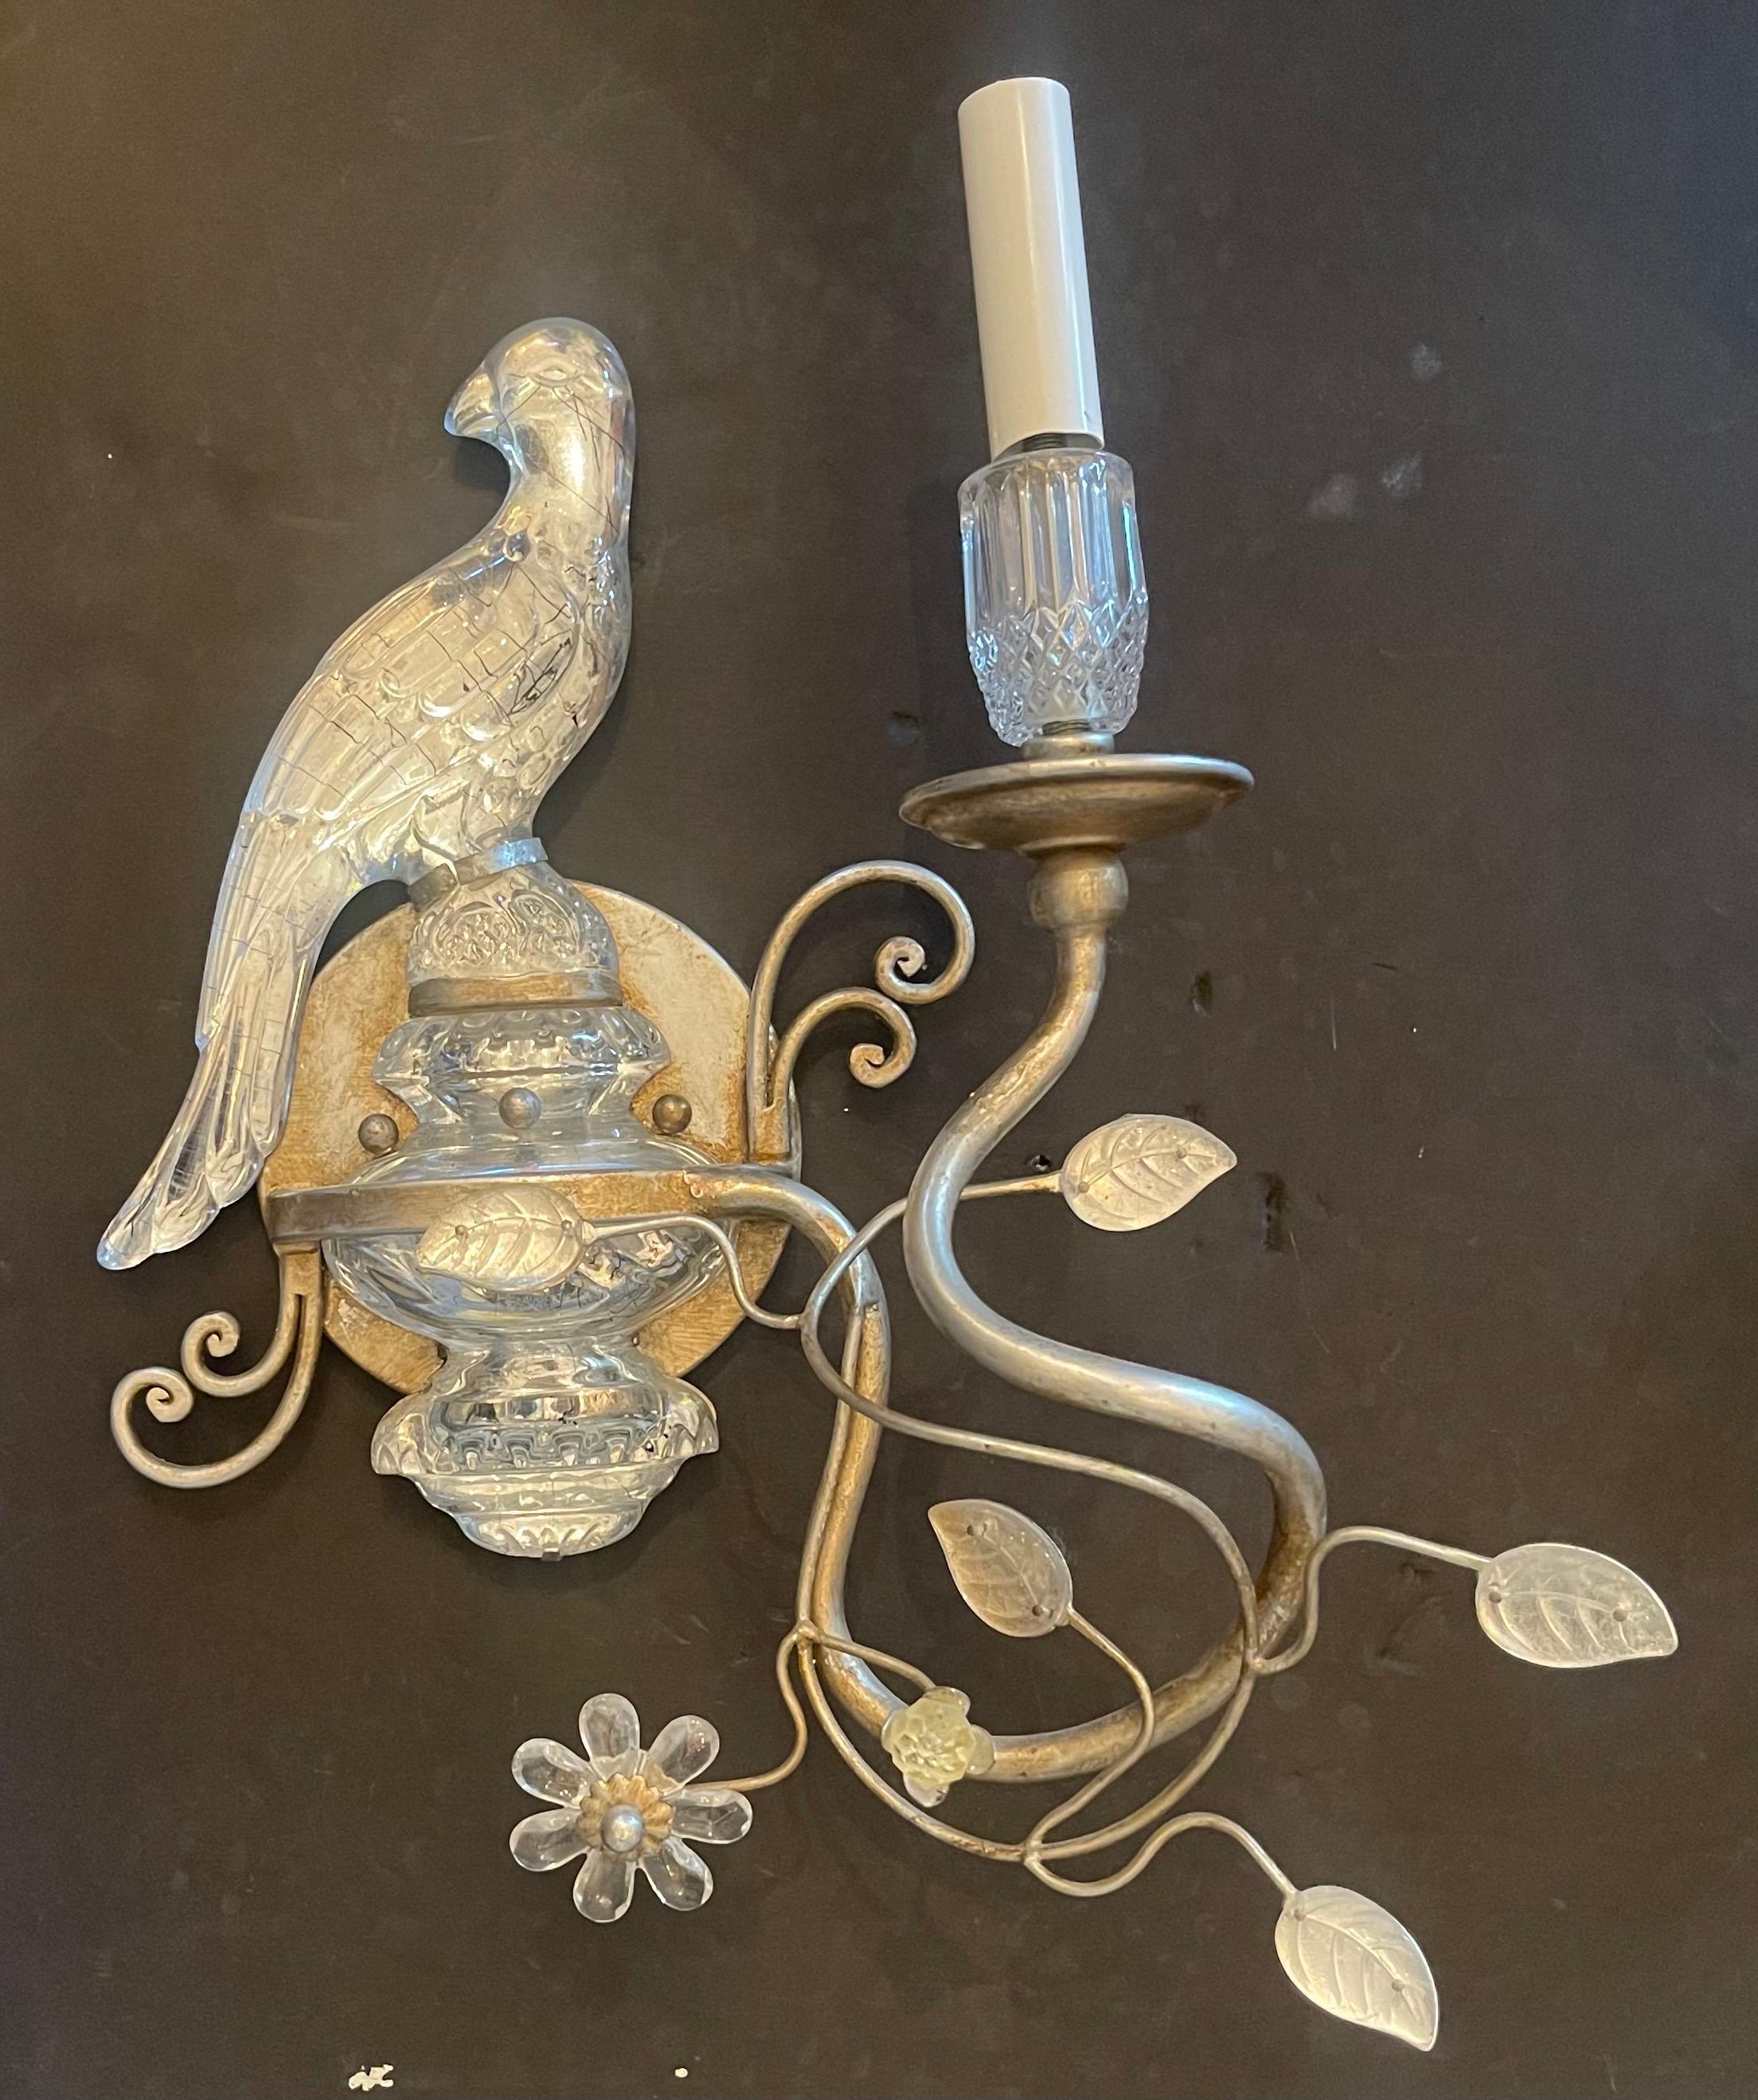 A Wonderful Vintage Pair Of Baguès Style Silver Gilt Faux Rock Crystal / Art Glass Parrot / Bird Resting On An Urn Sconces, Each Wired With A New Candelabra Socket Ready To Install With Mounting Hardware 